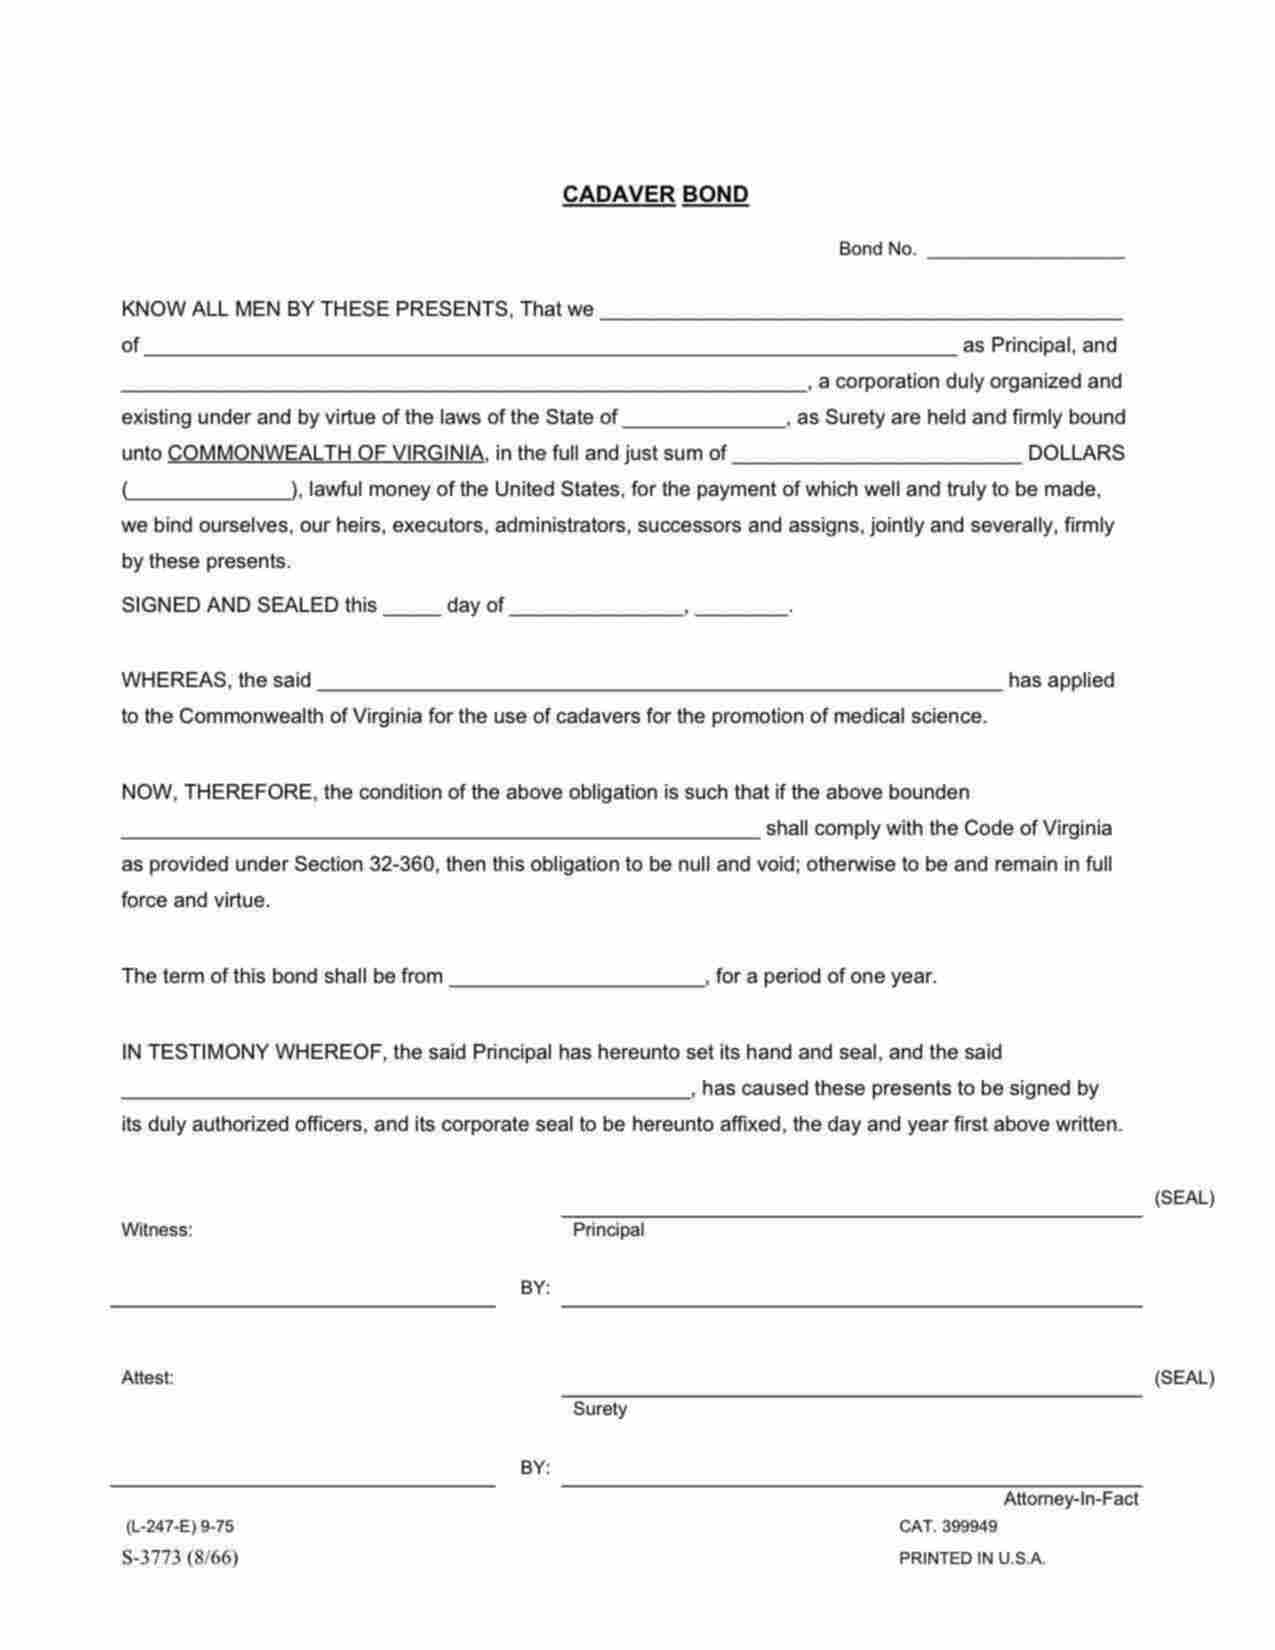 Virginia Cadaver (Use of Cadavers for the Promotion of Medical Science) Bond Form